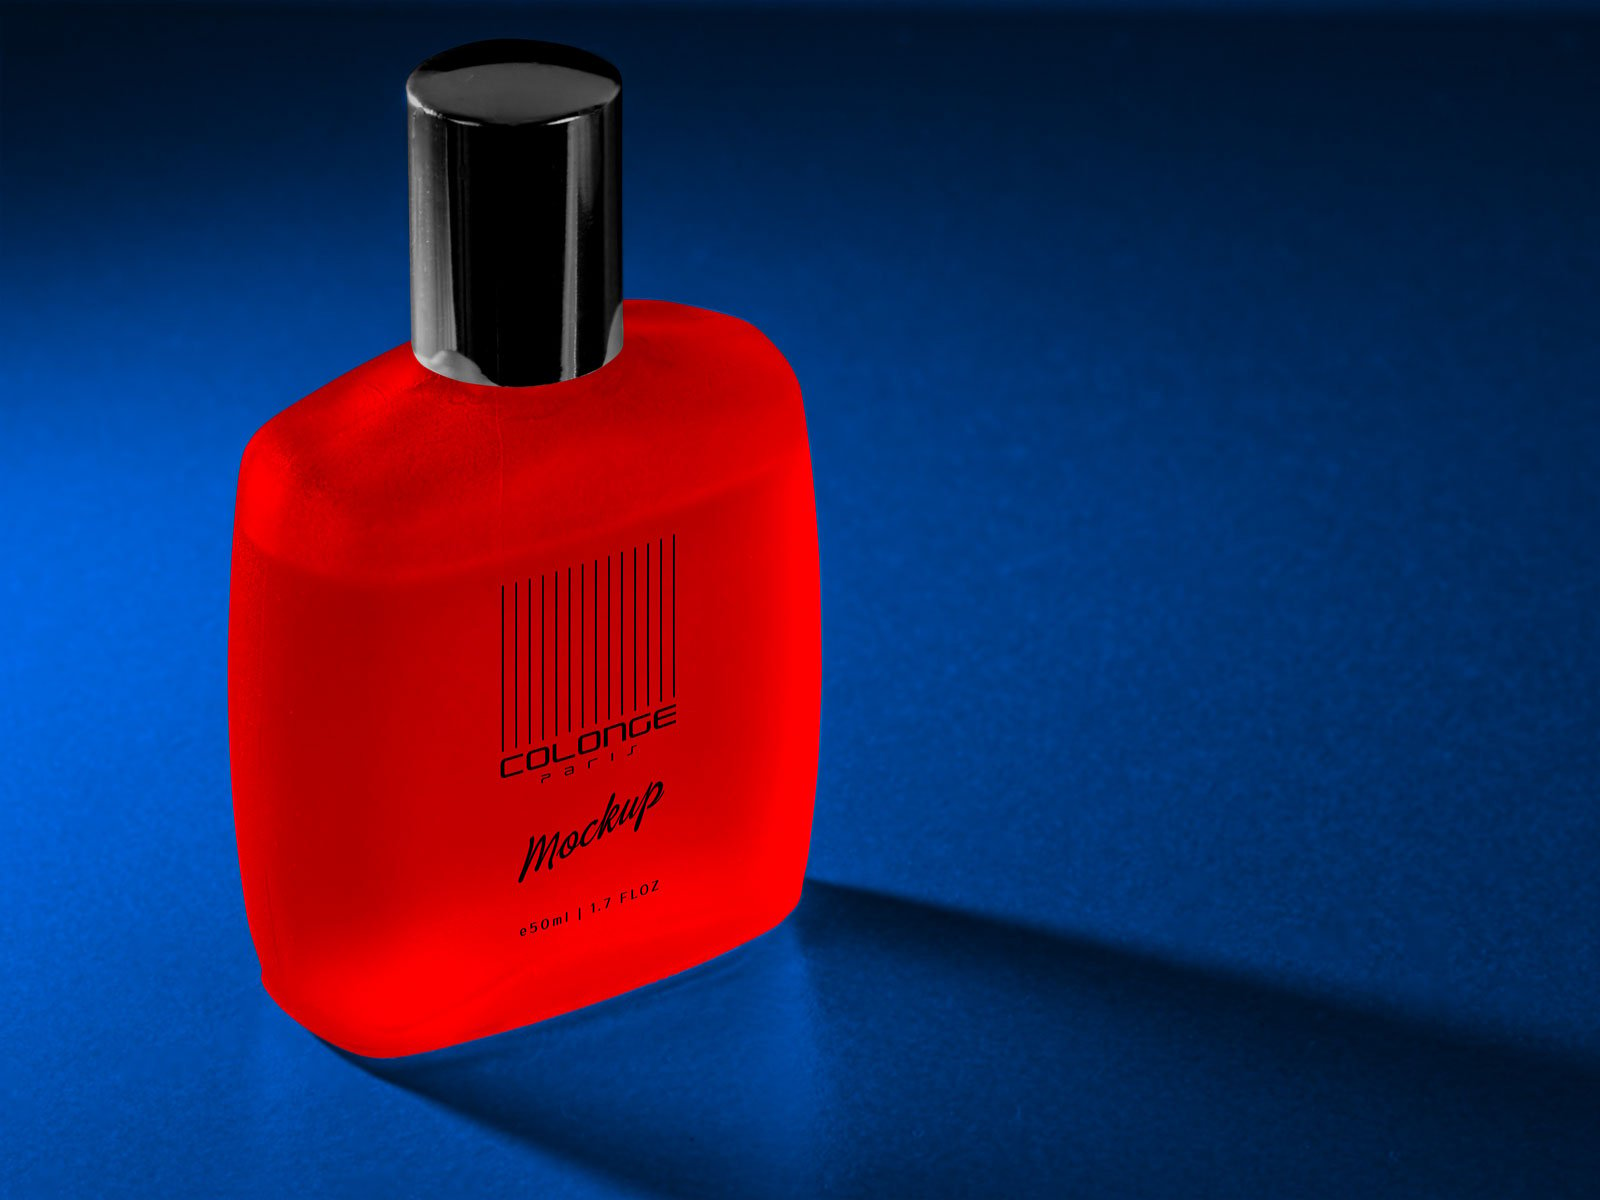 Free Frosted Cologne / Perfume Bottle Mockup PSD | Designbolts